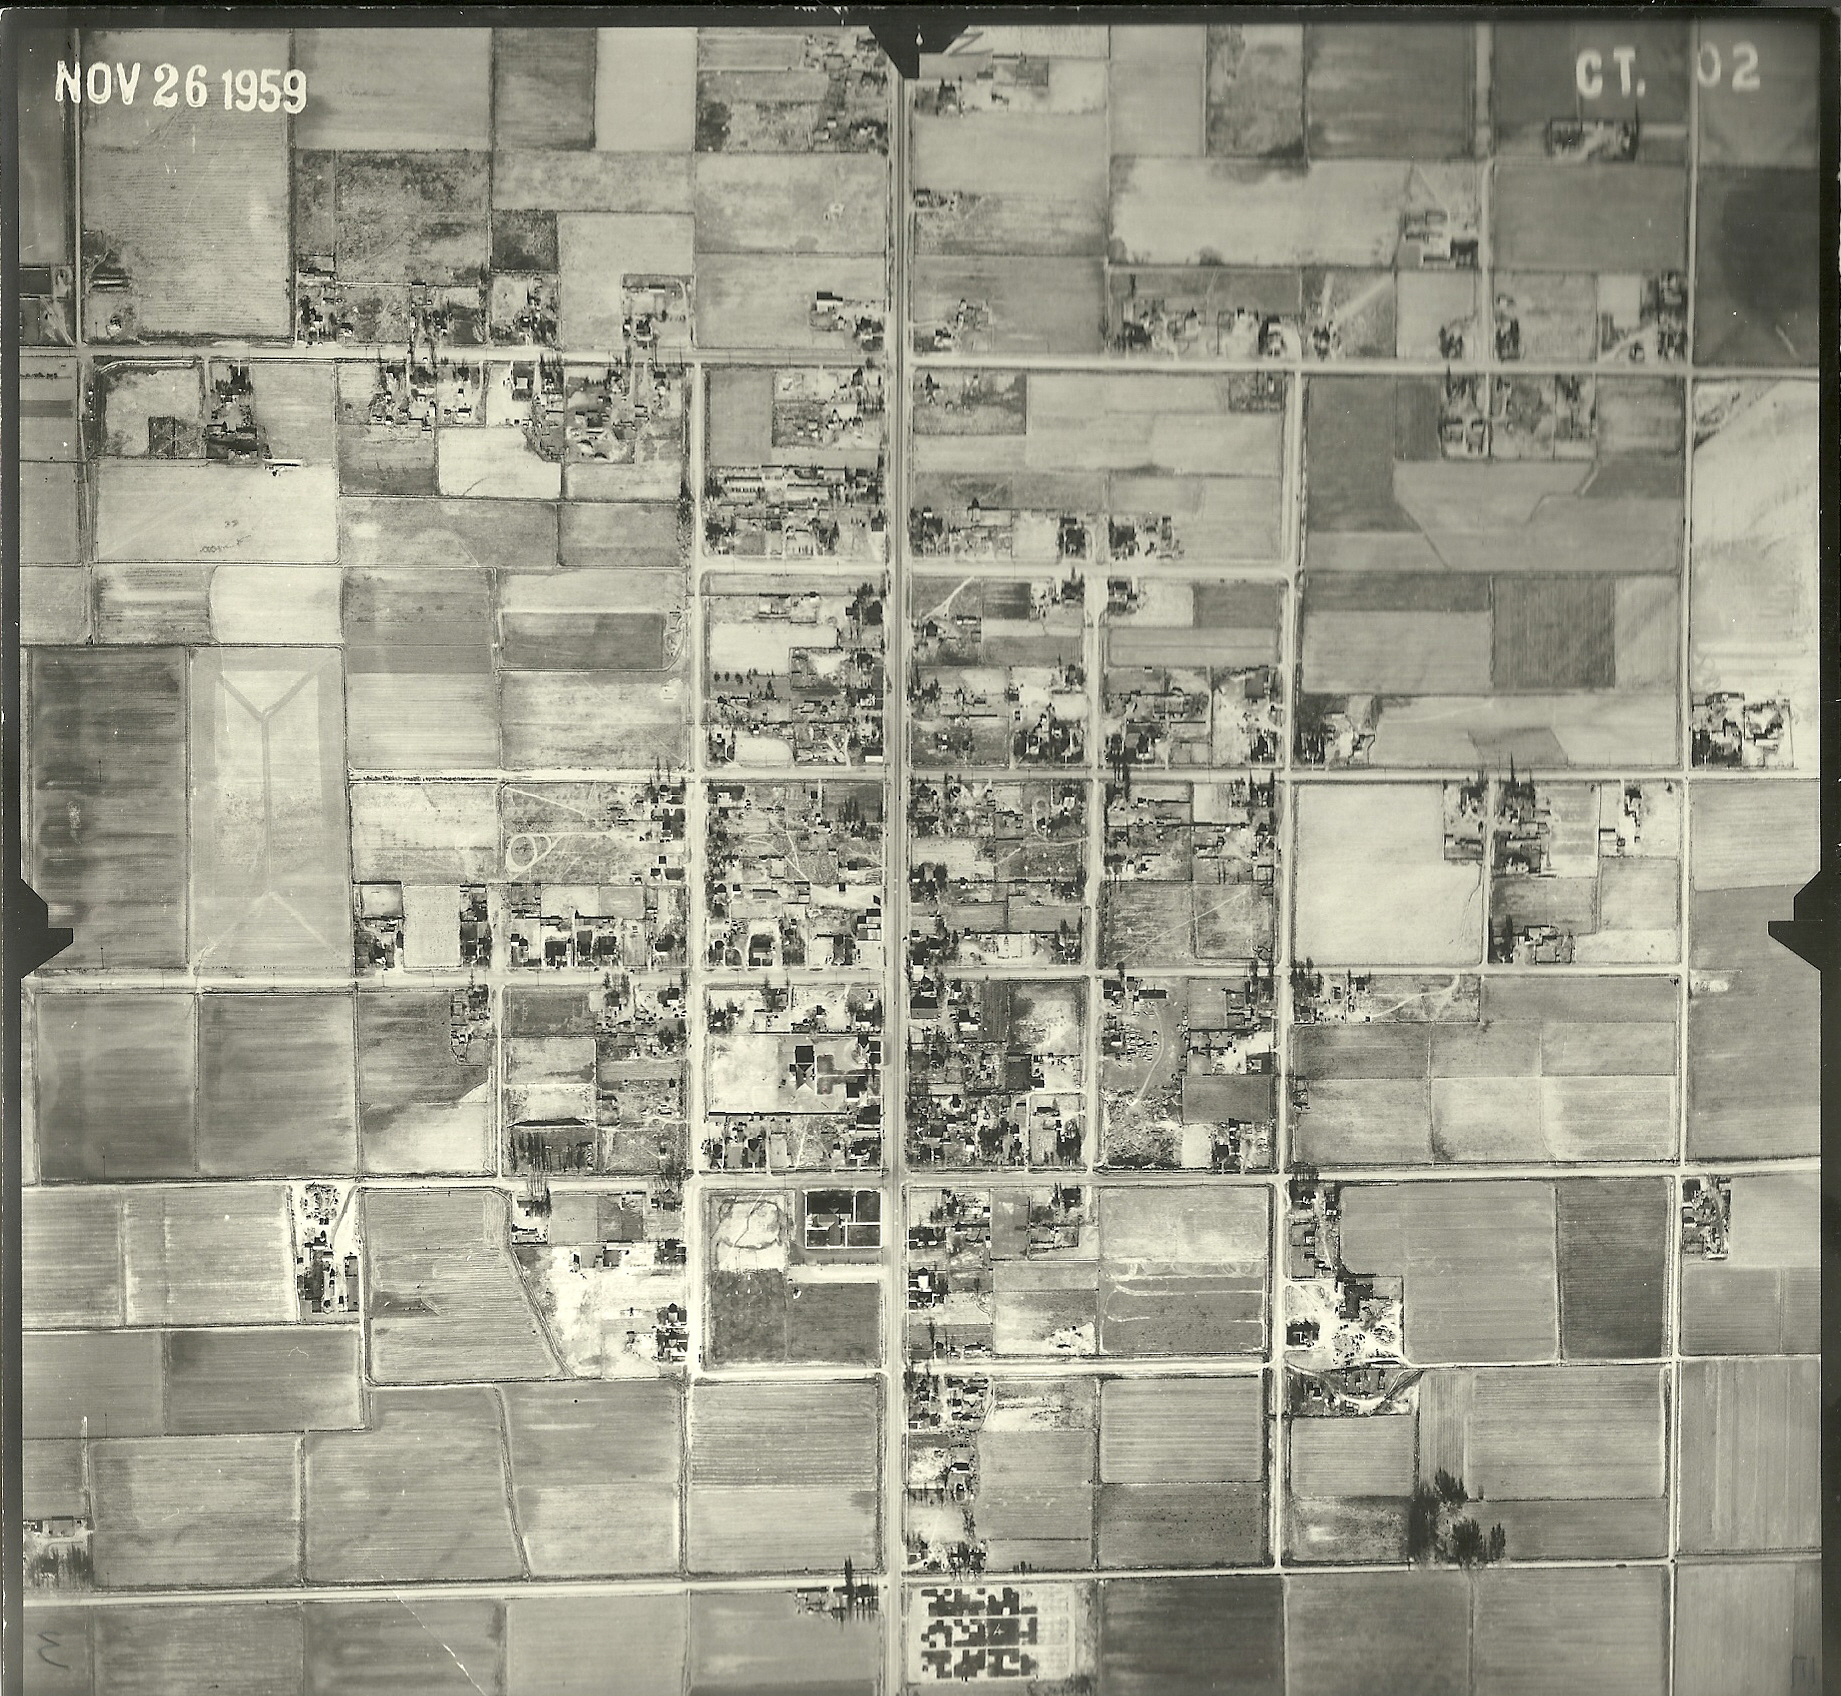 1959 Aerial View